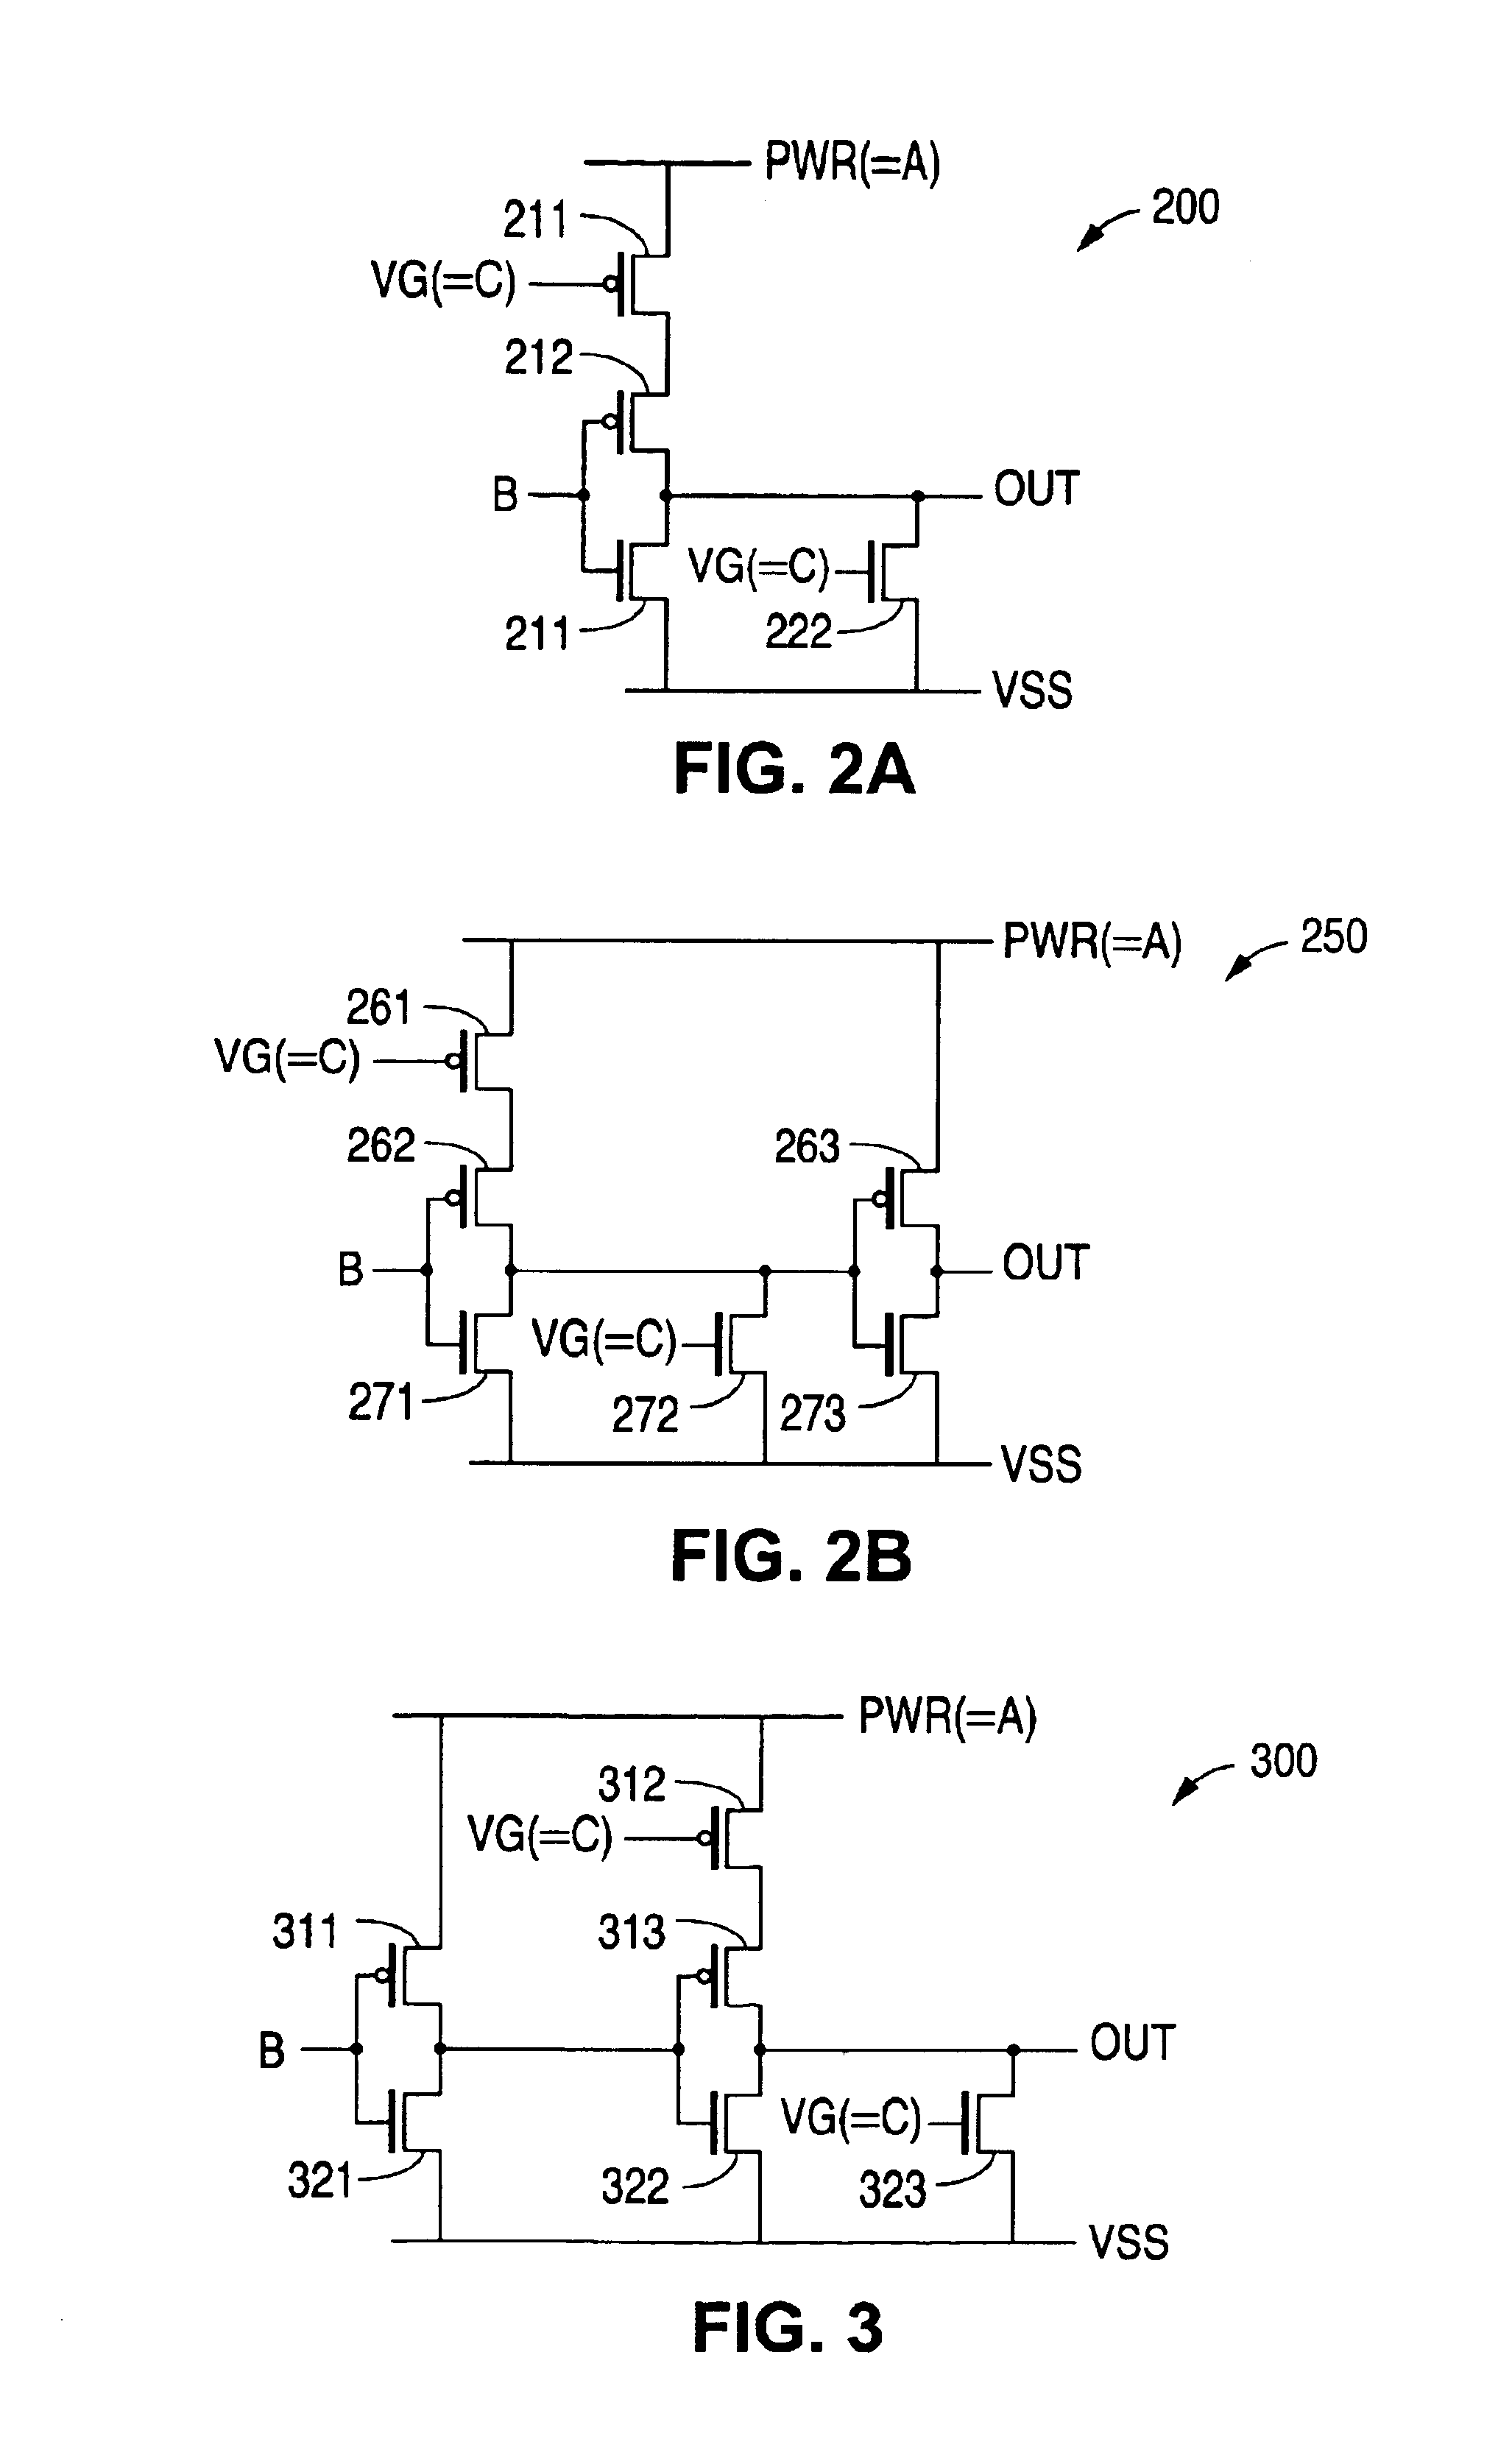 Circuitry for providing overvoltage backdrive protection